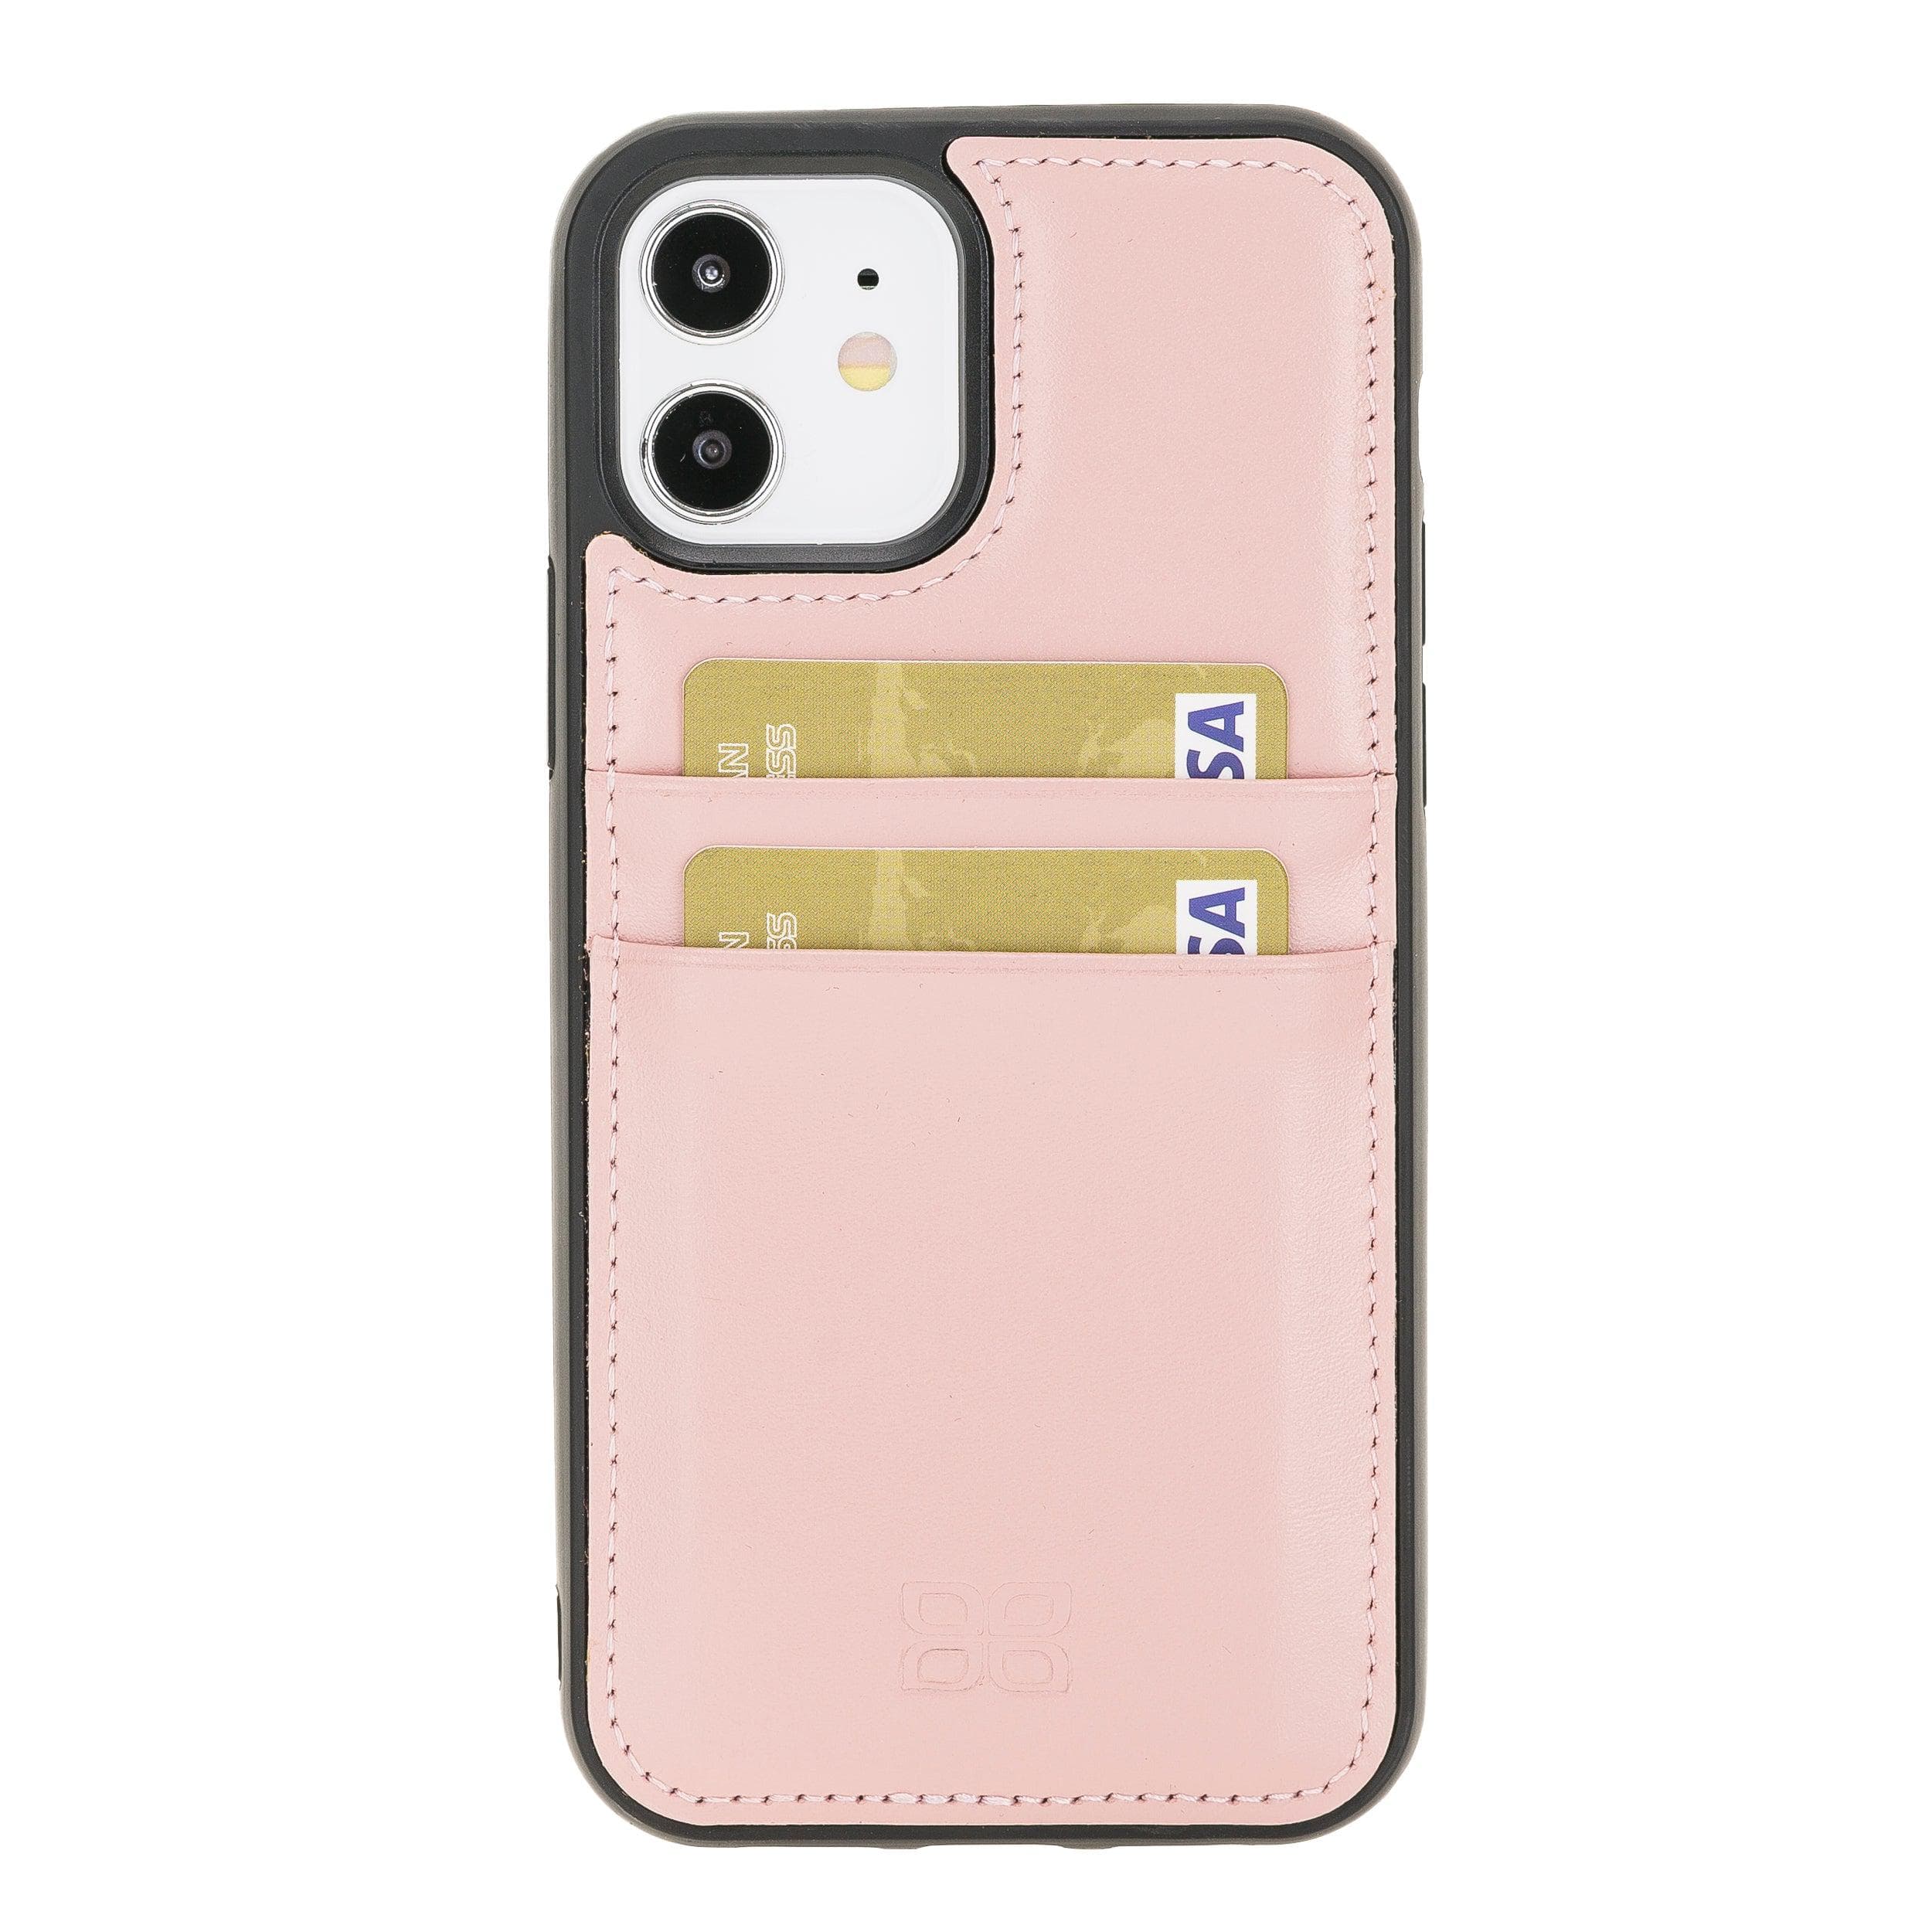 Flexible Leather Back Cover with Card Holder for iPhone 12 Series iPhone 12 Pro / Pink Bouletta LTD